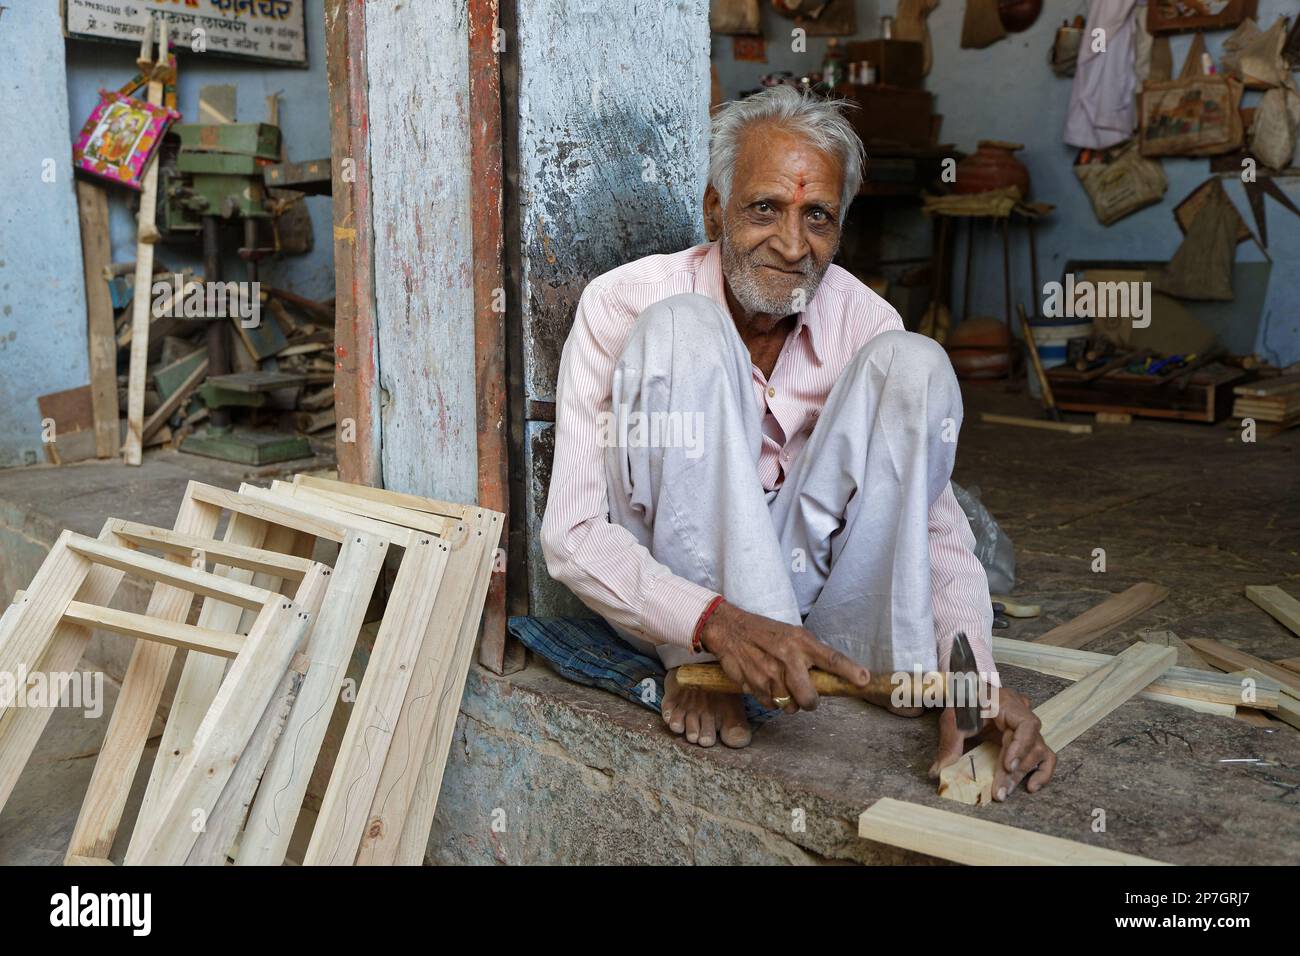 LAKHERI, INDIA, November 7, 2017 : An old indian man works on wood pieces to make frames. Stock Photo